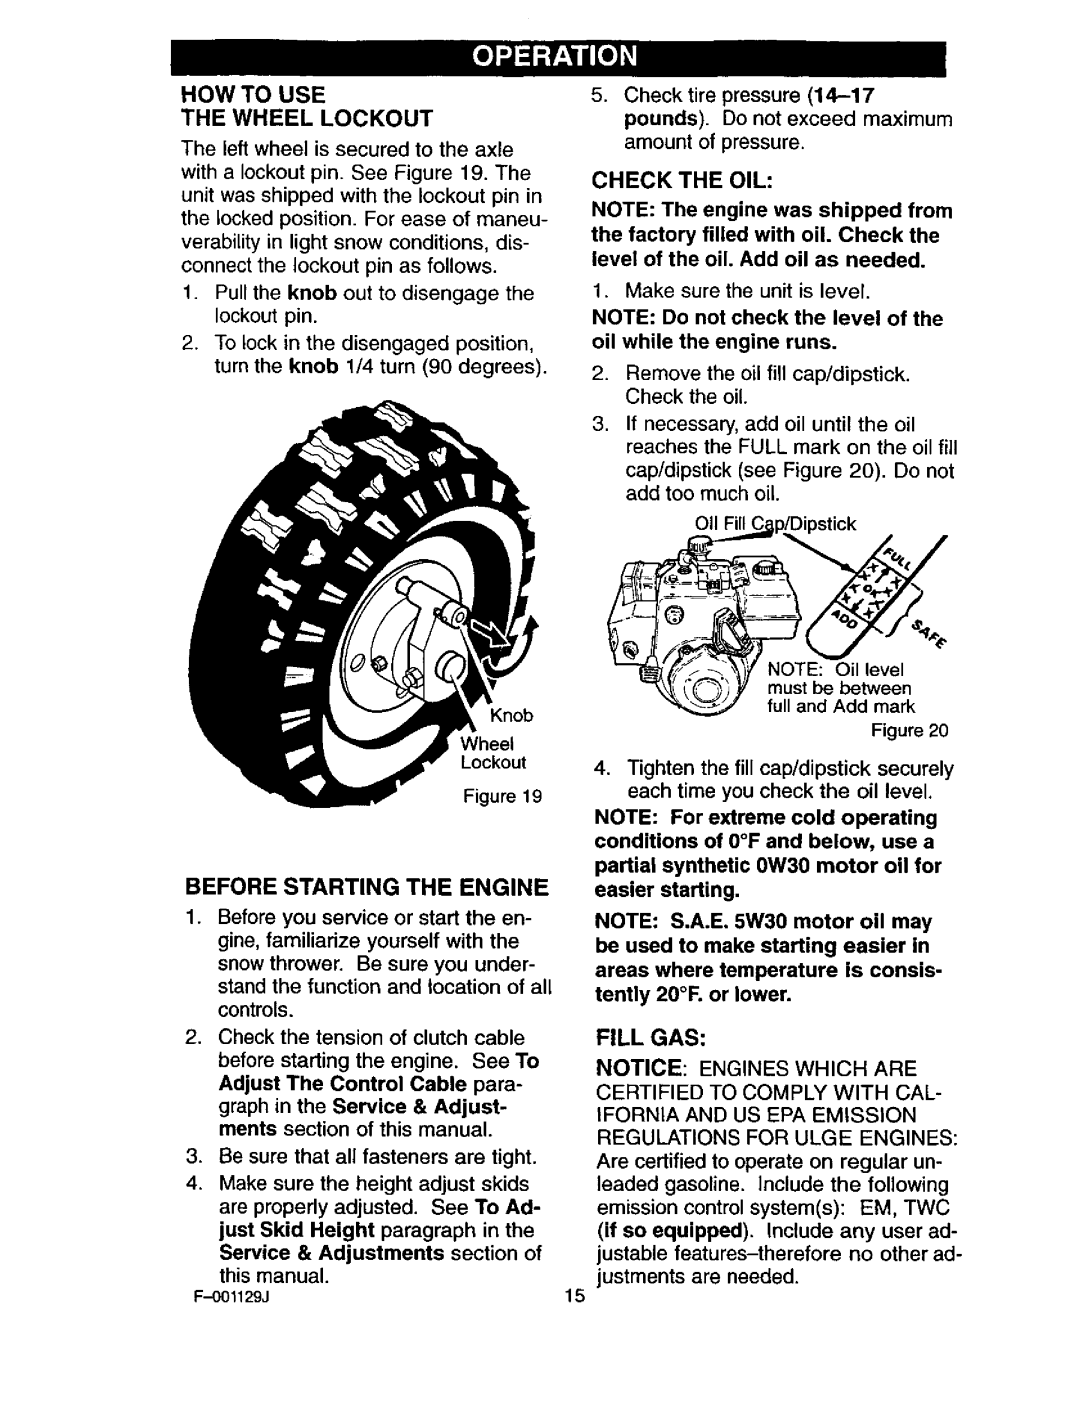 Craftsman 536.88112 operating instructions HOW to USE Wheel Lockout, Before Starting the Engine, Fill GAS, Check the OIL 